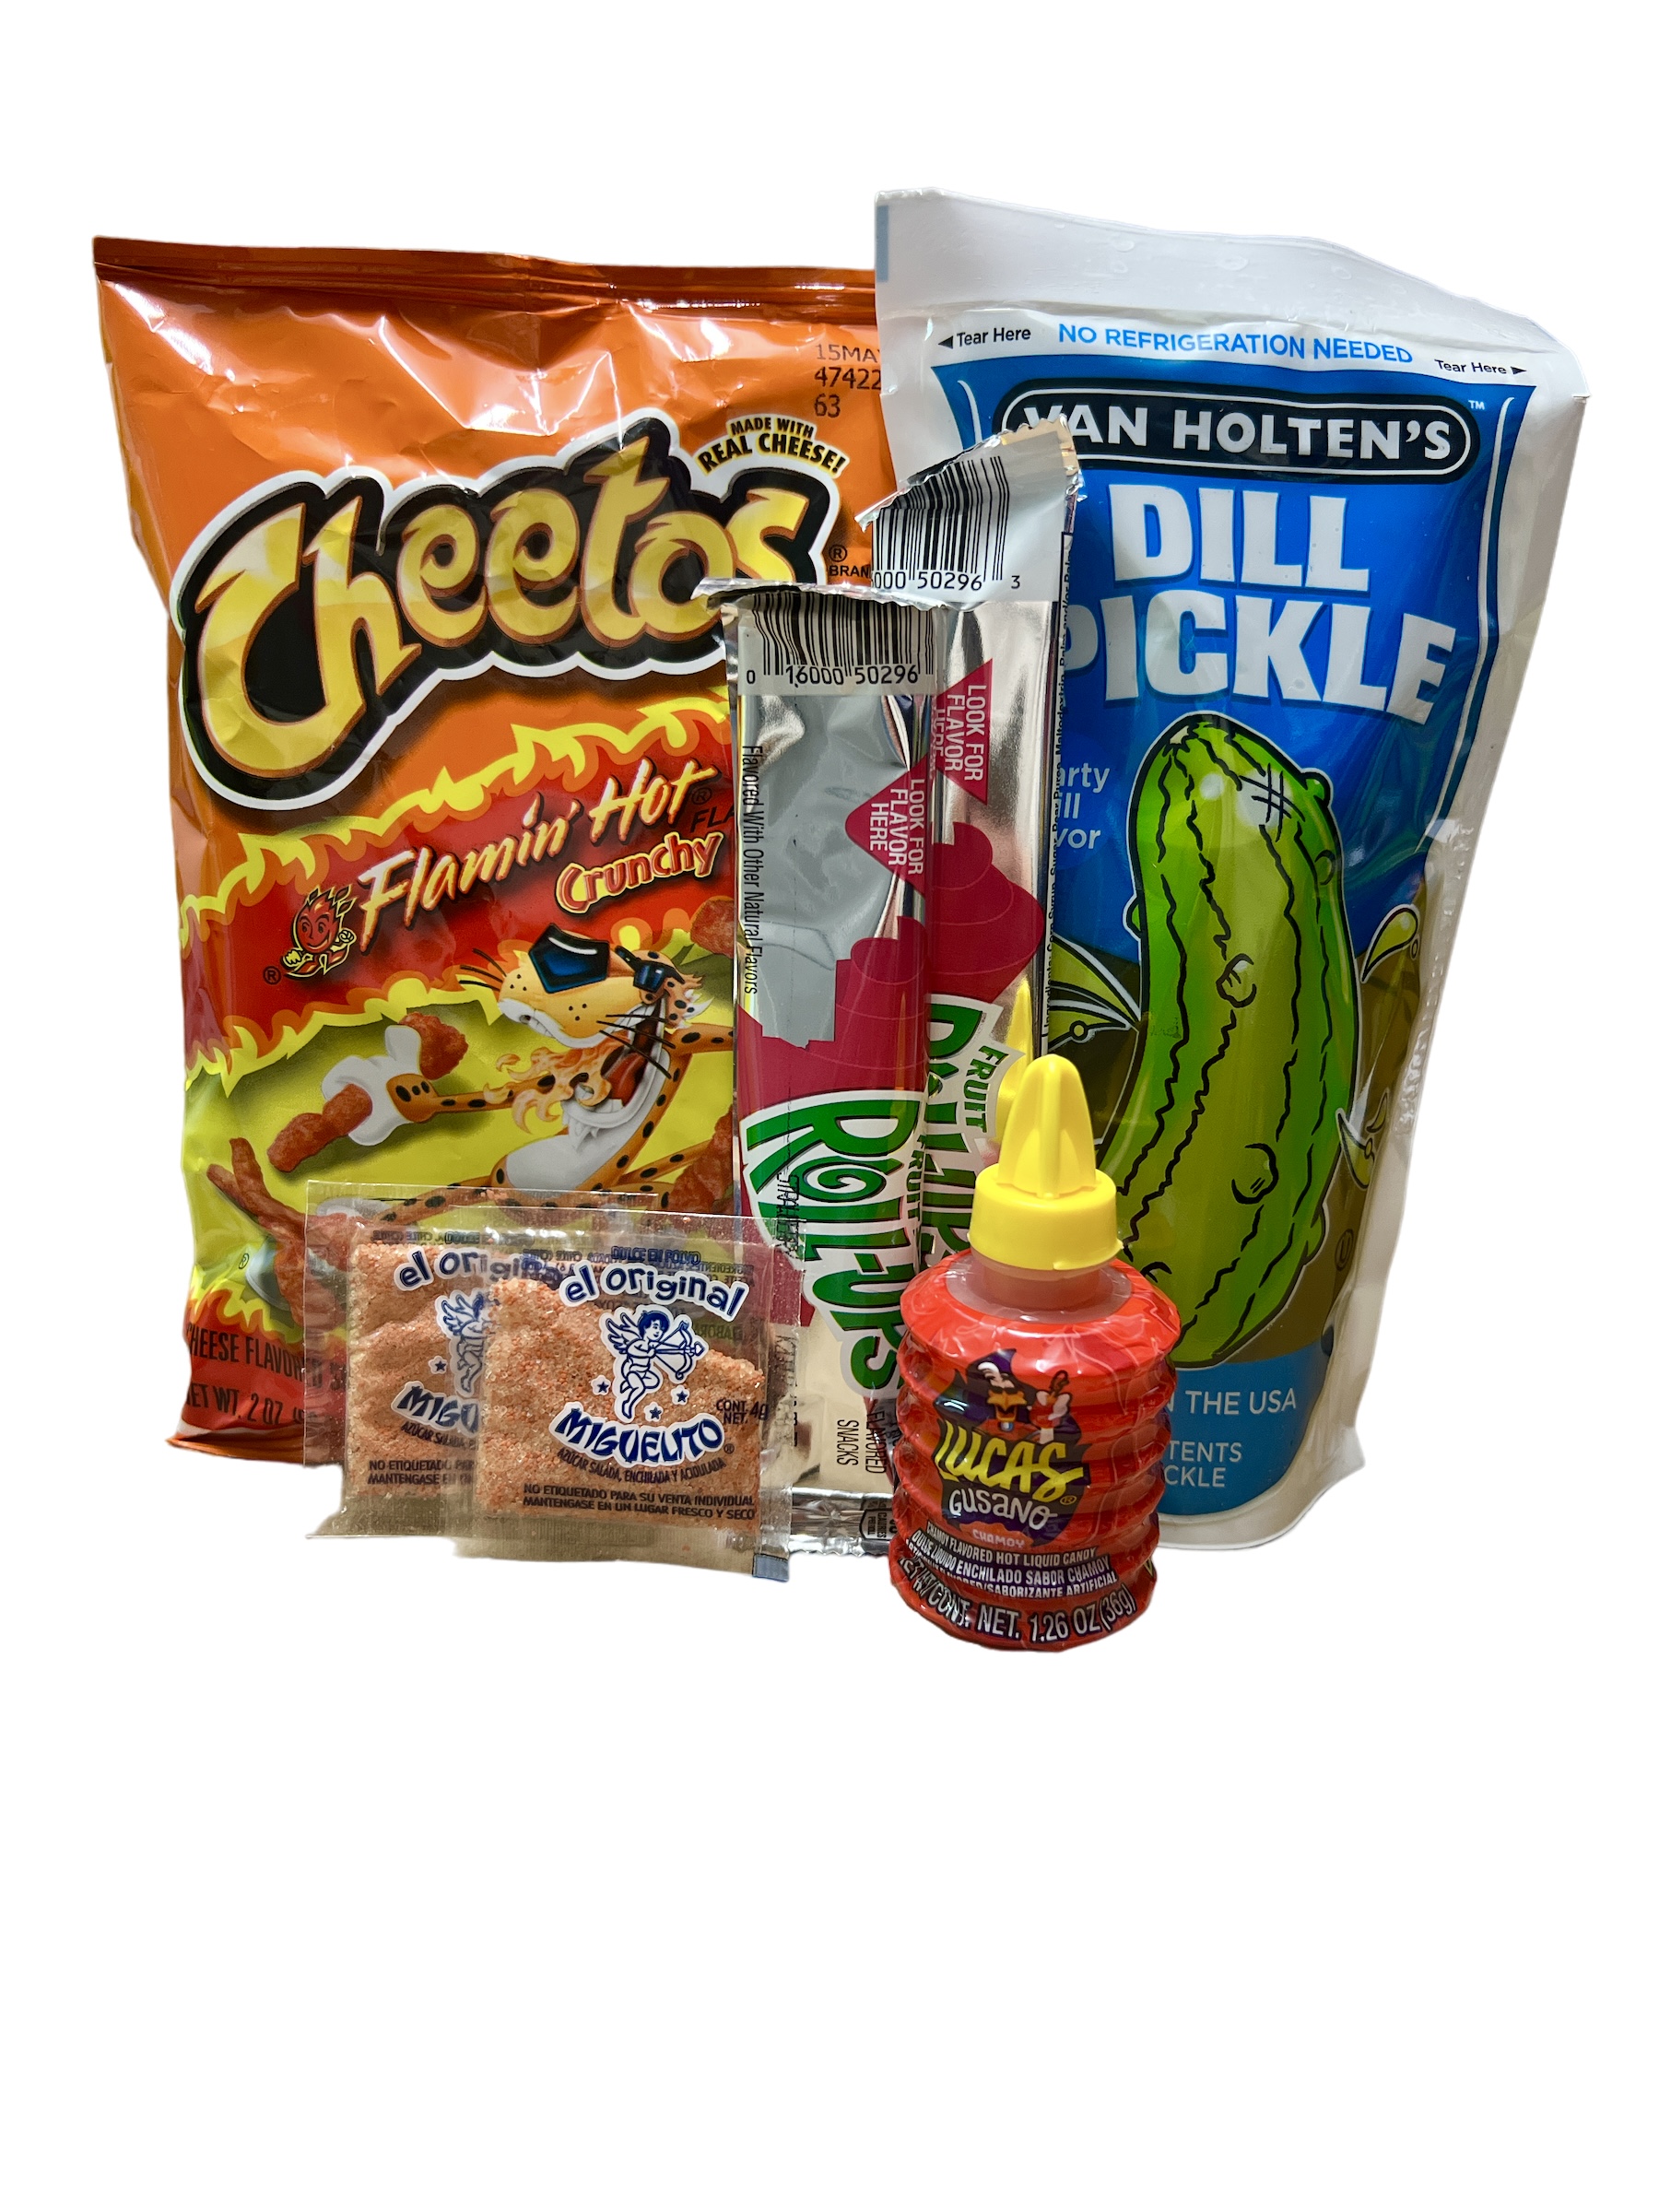 CHAMOY PICKLE KIT WITH FRUIT ROLL UPS – CHOOSE YOUR OWN PICKLE